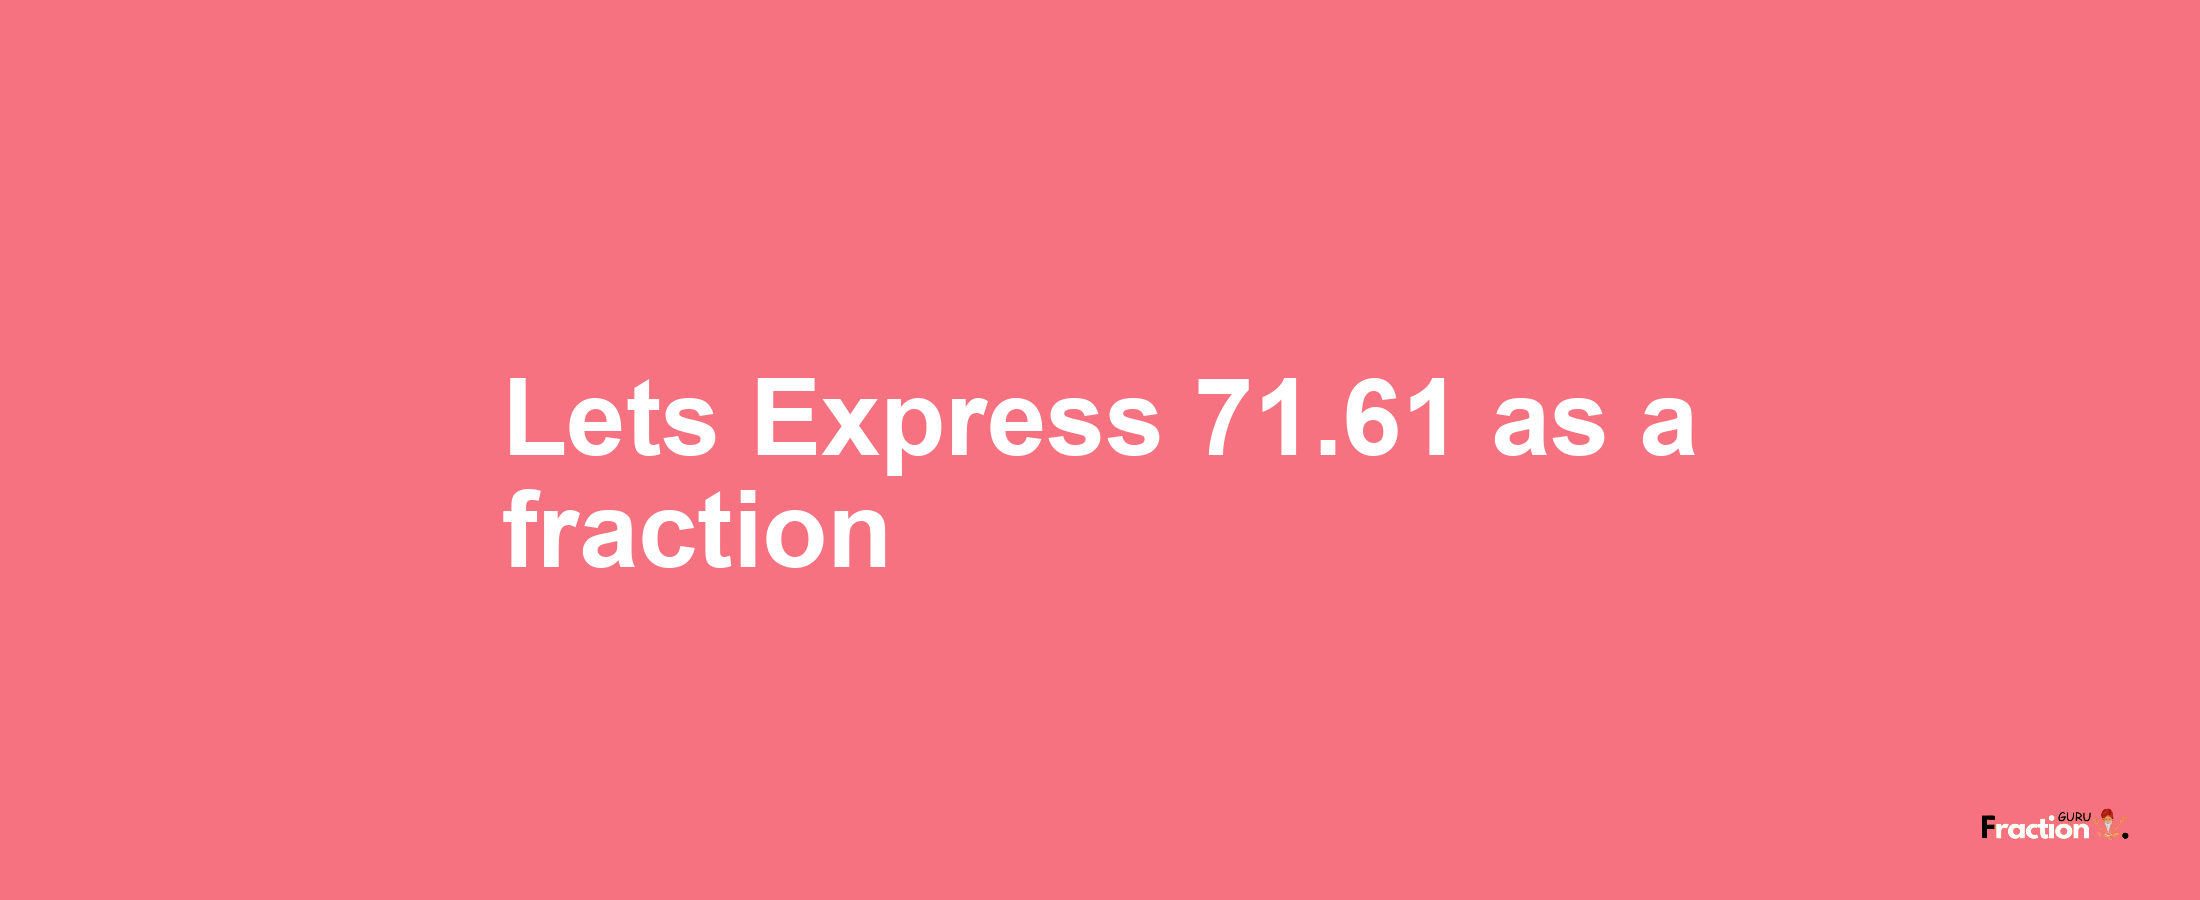 Lets Express 71.61 as afraction